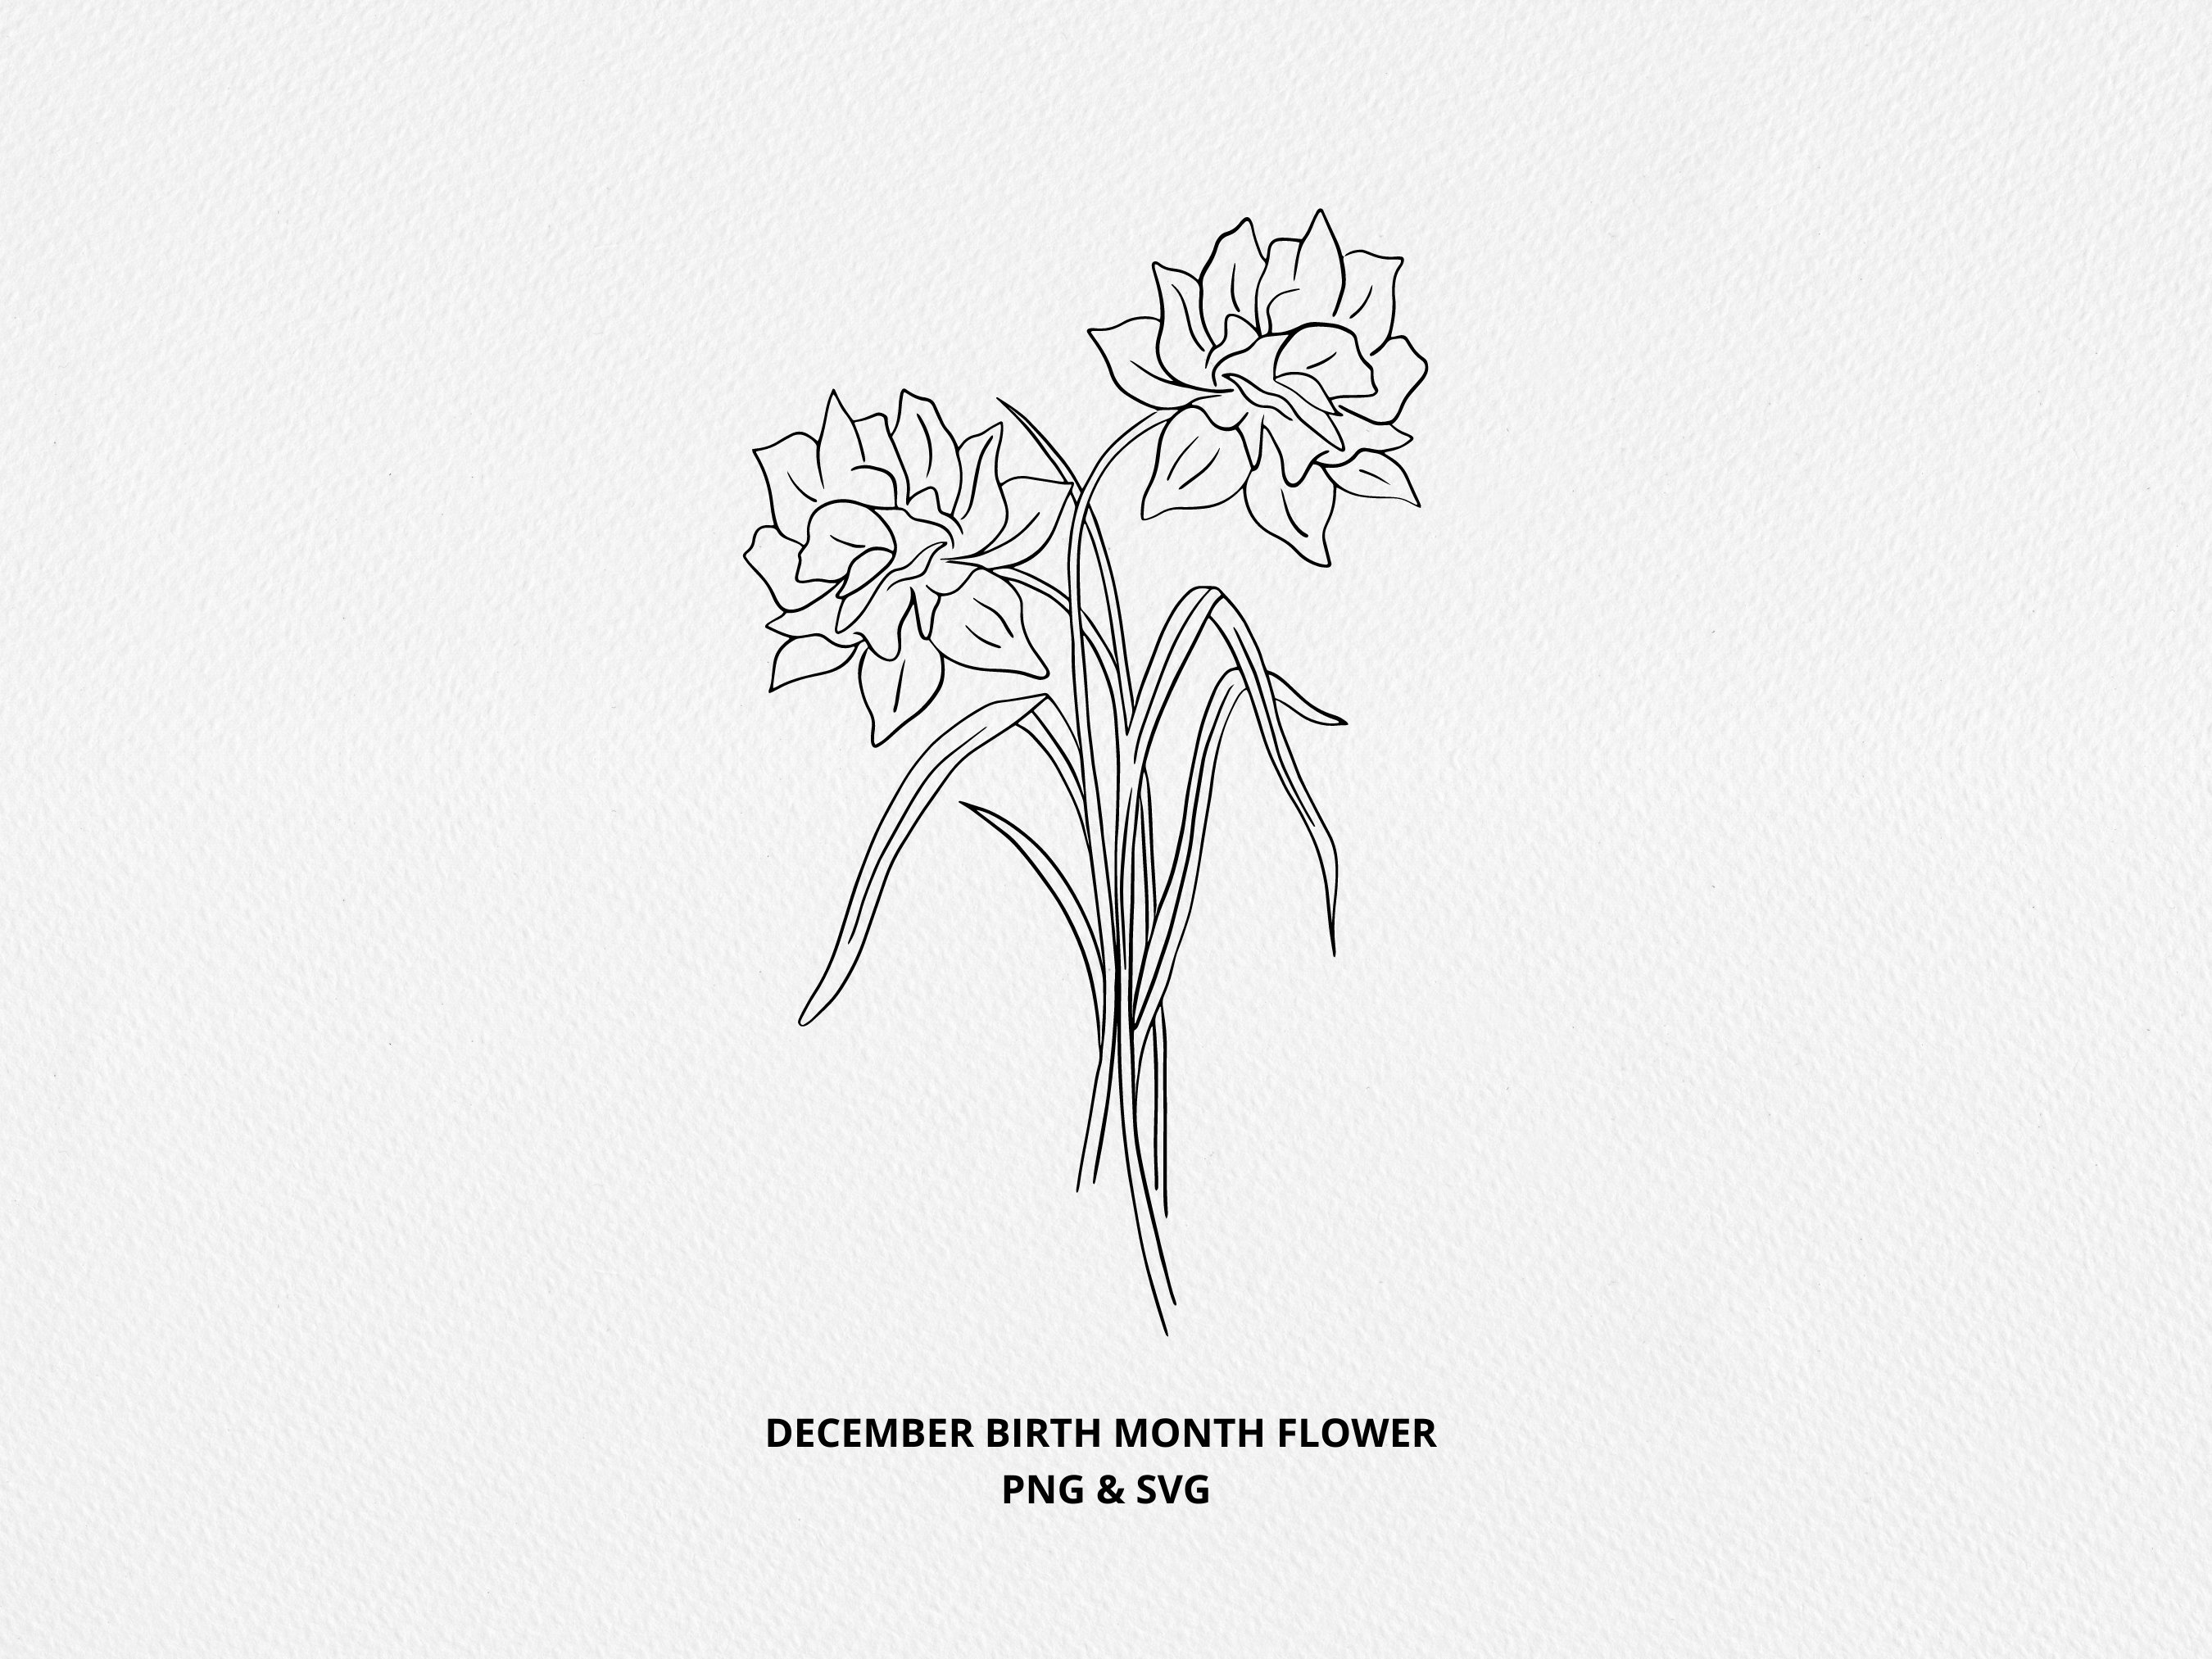 Birthflower December Narcissus Flower one line contour drawing   Sticker for Sale by EtienneOutram  Redbubble